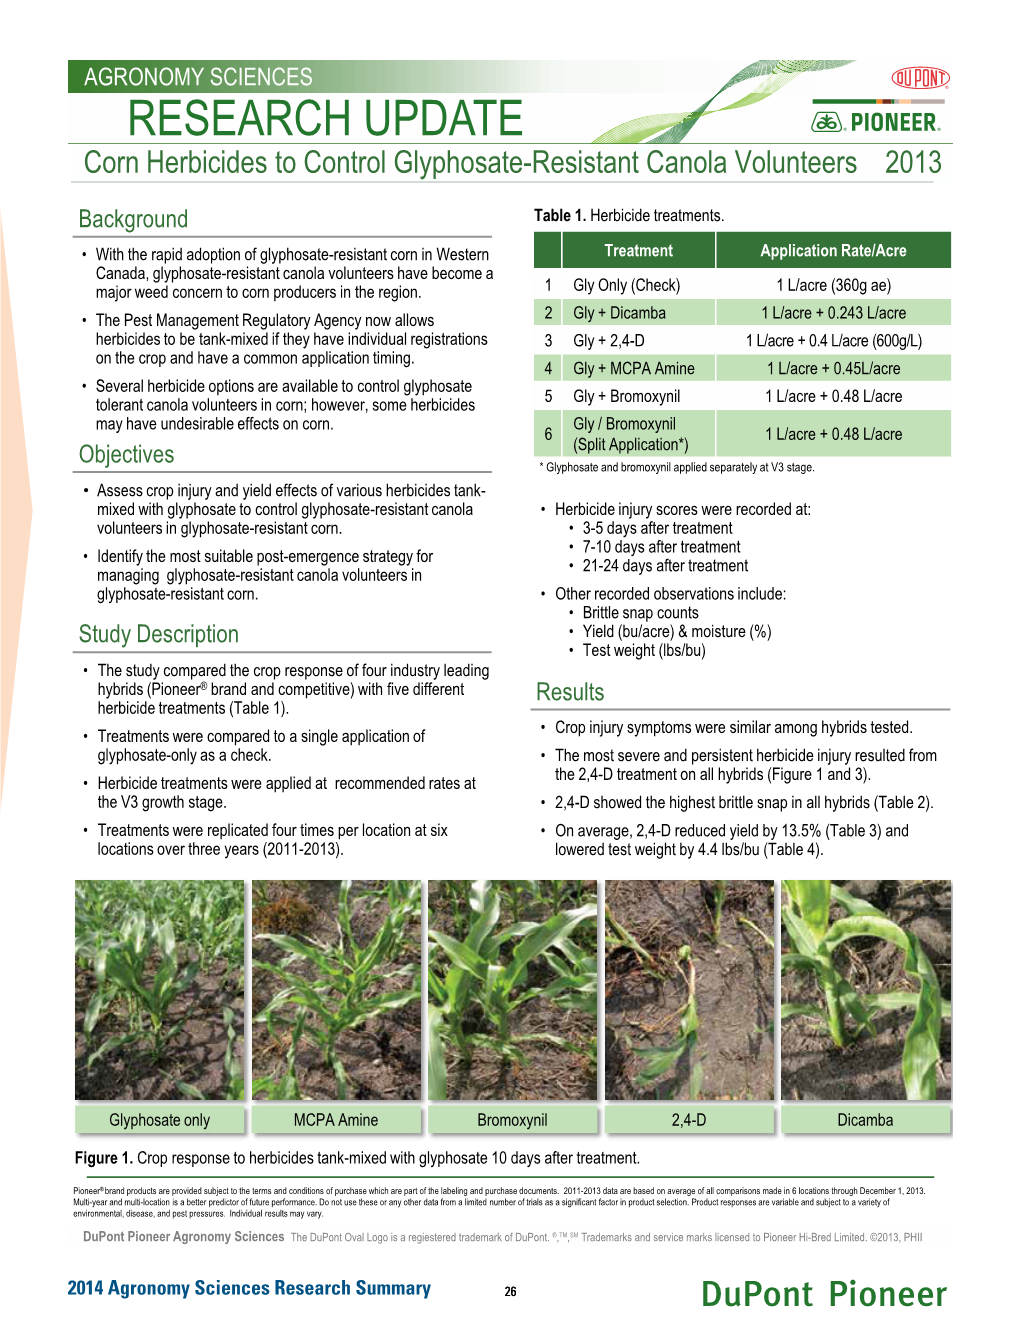 Corn Herbicides to Control Glyphsoate-Resistant Canola Volunteers